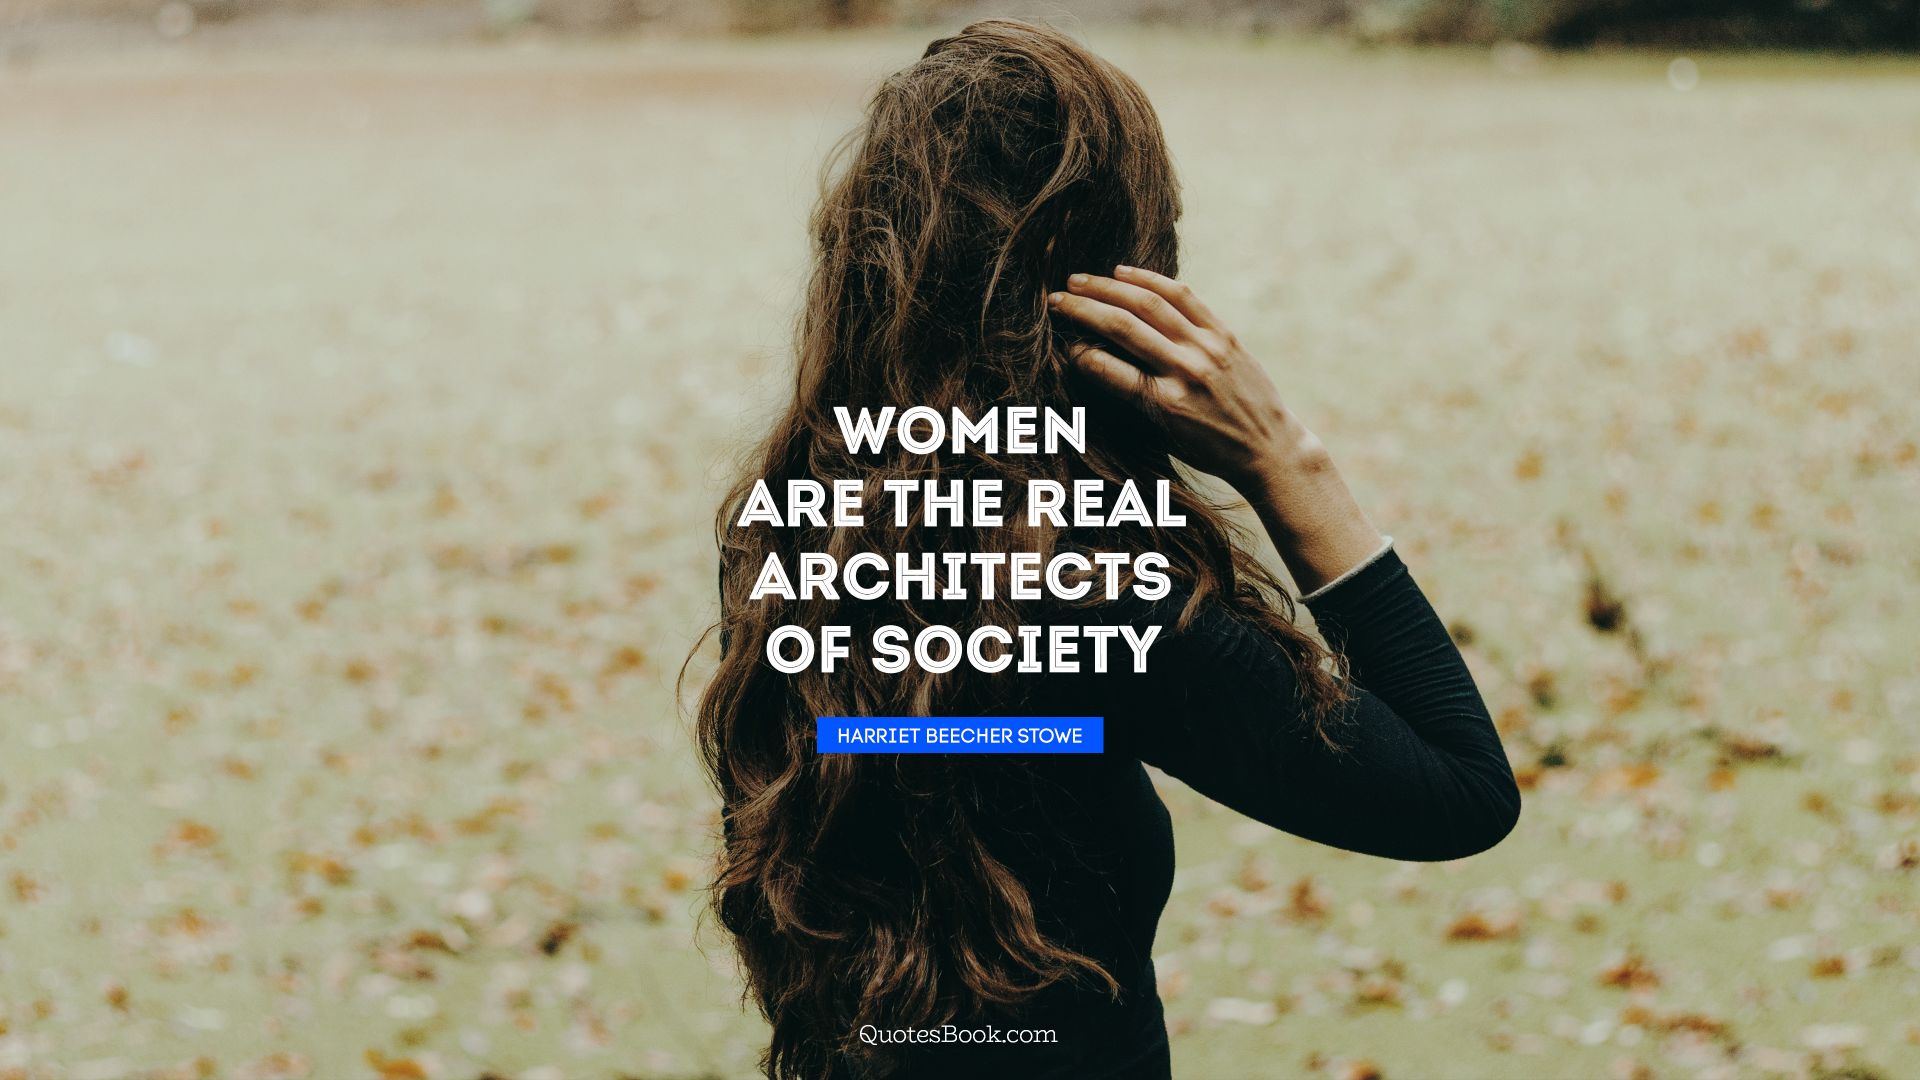 Women are the real architects of society. - Quote by Harriet Beecher Stowe